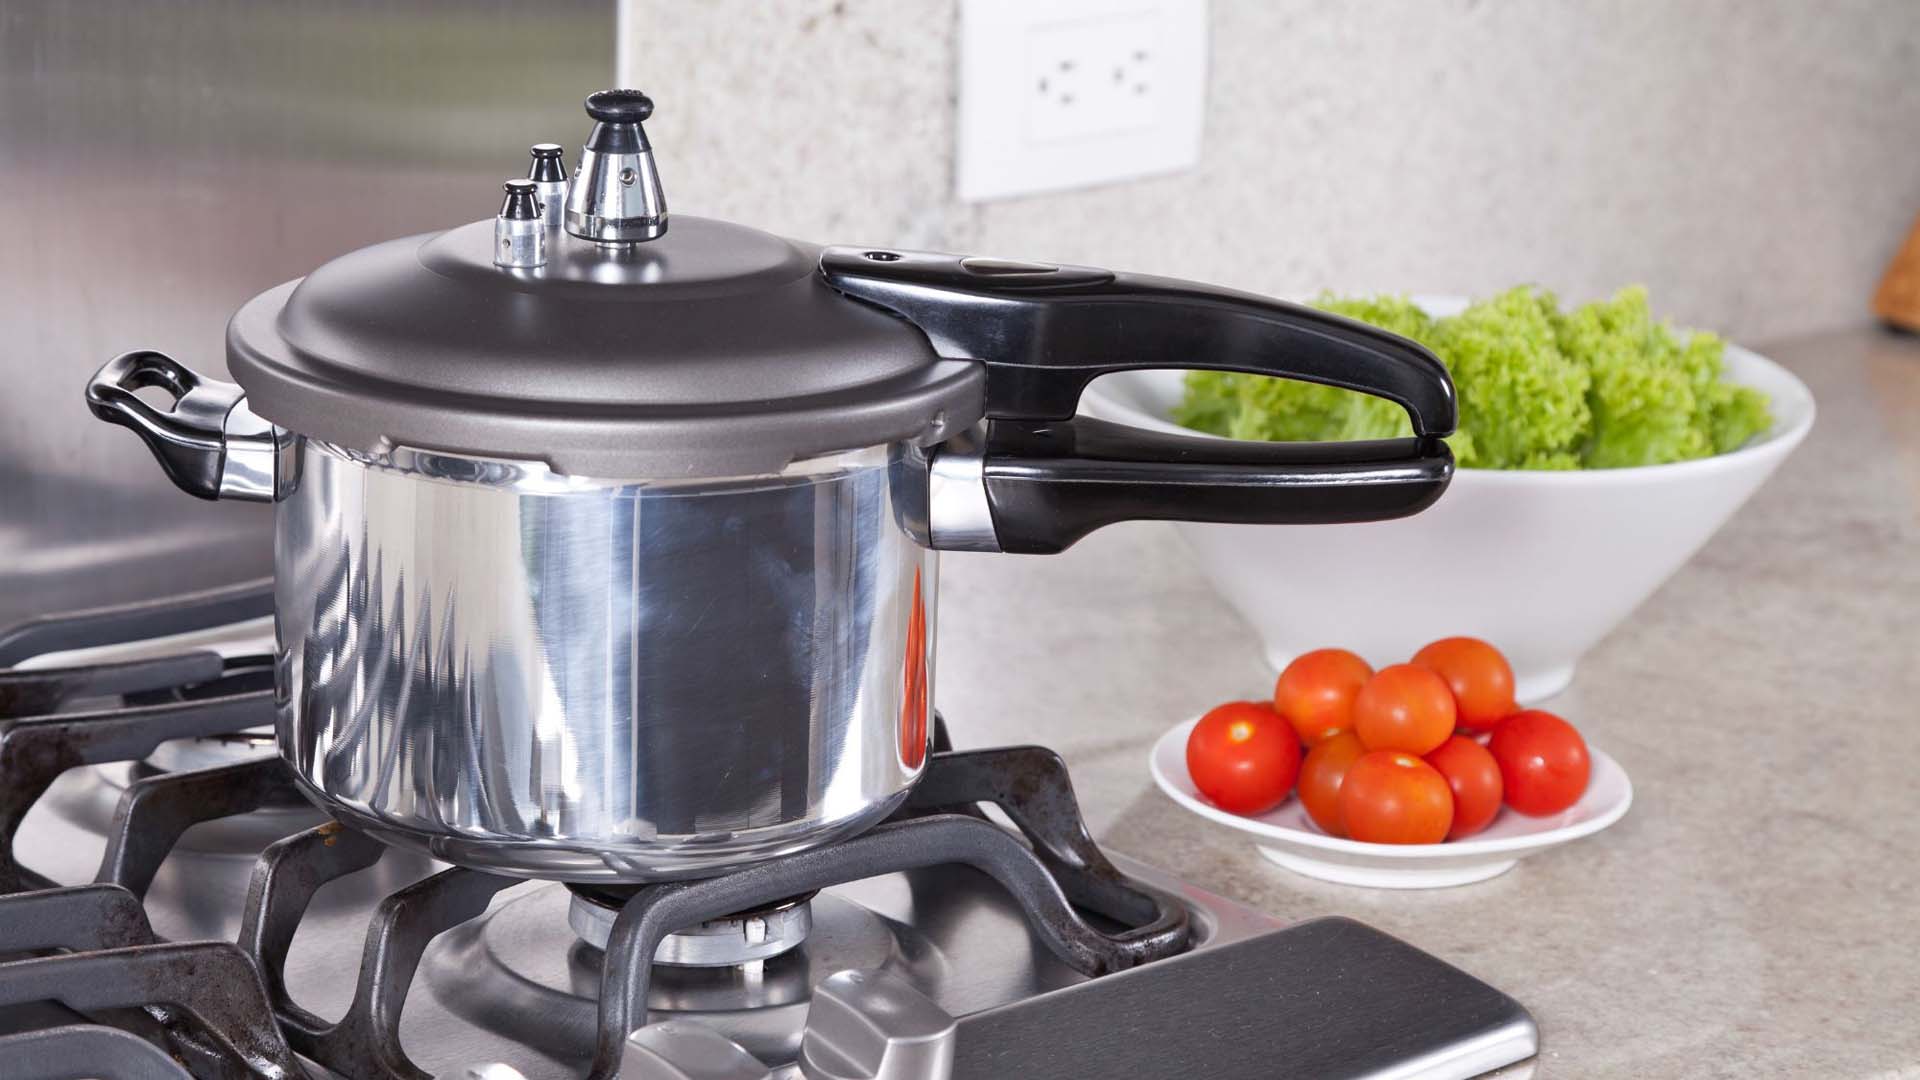 A stove-top pressure cooker on the hob with food items in the background